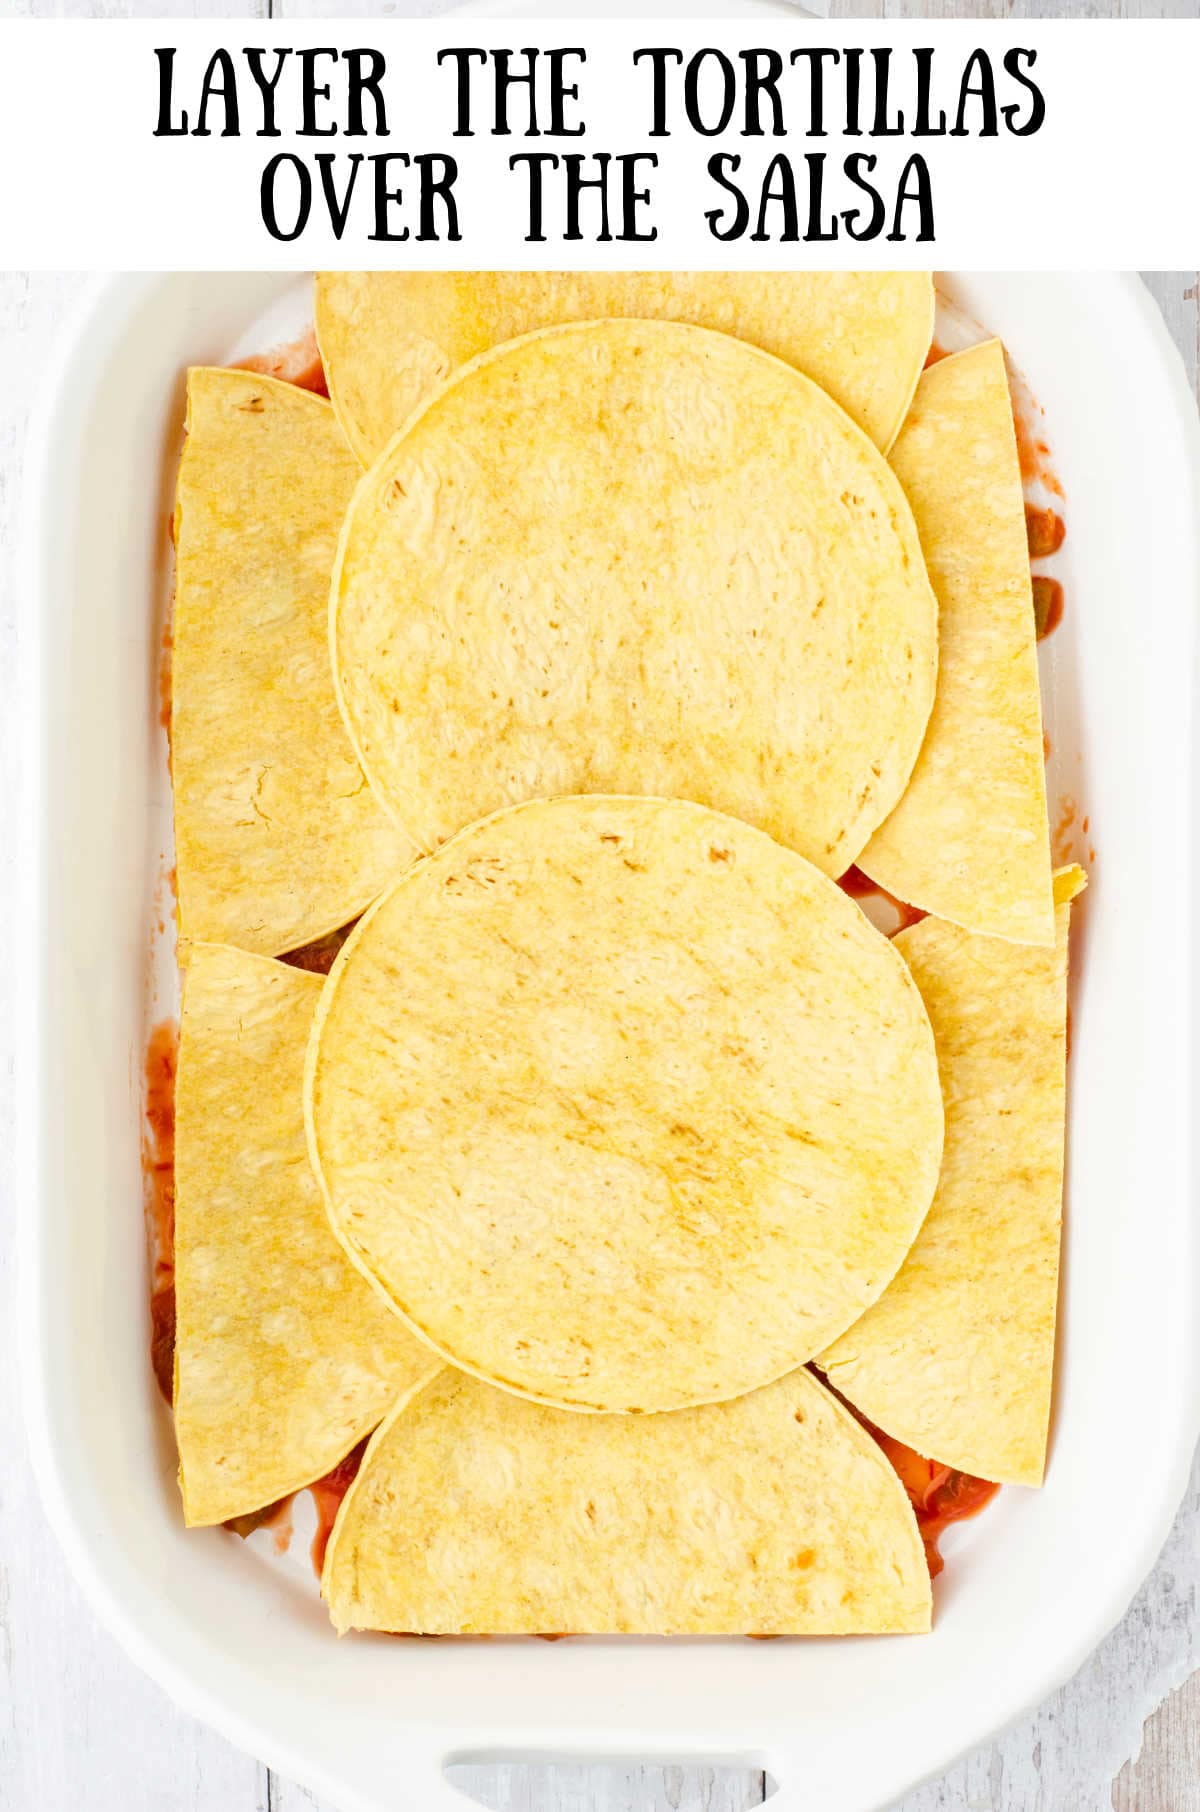 Tortillas cut and fit into the bottom of the casserole dish.